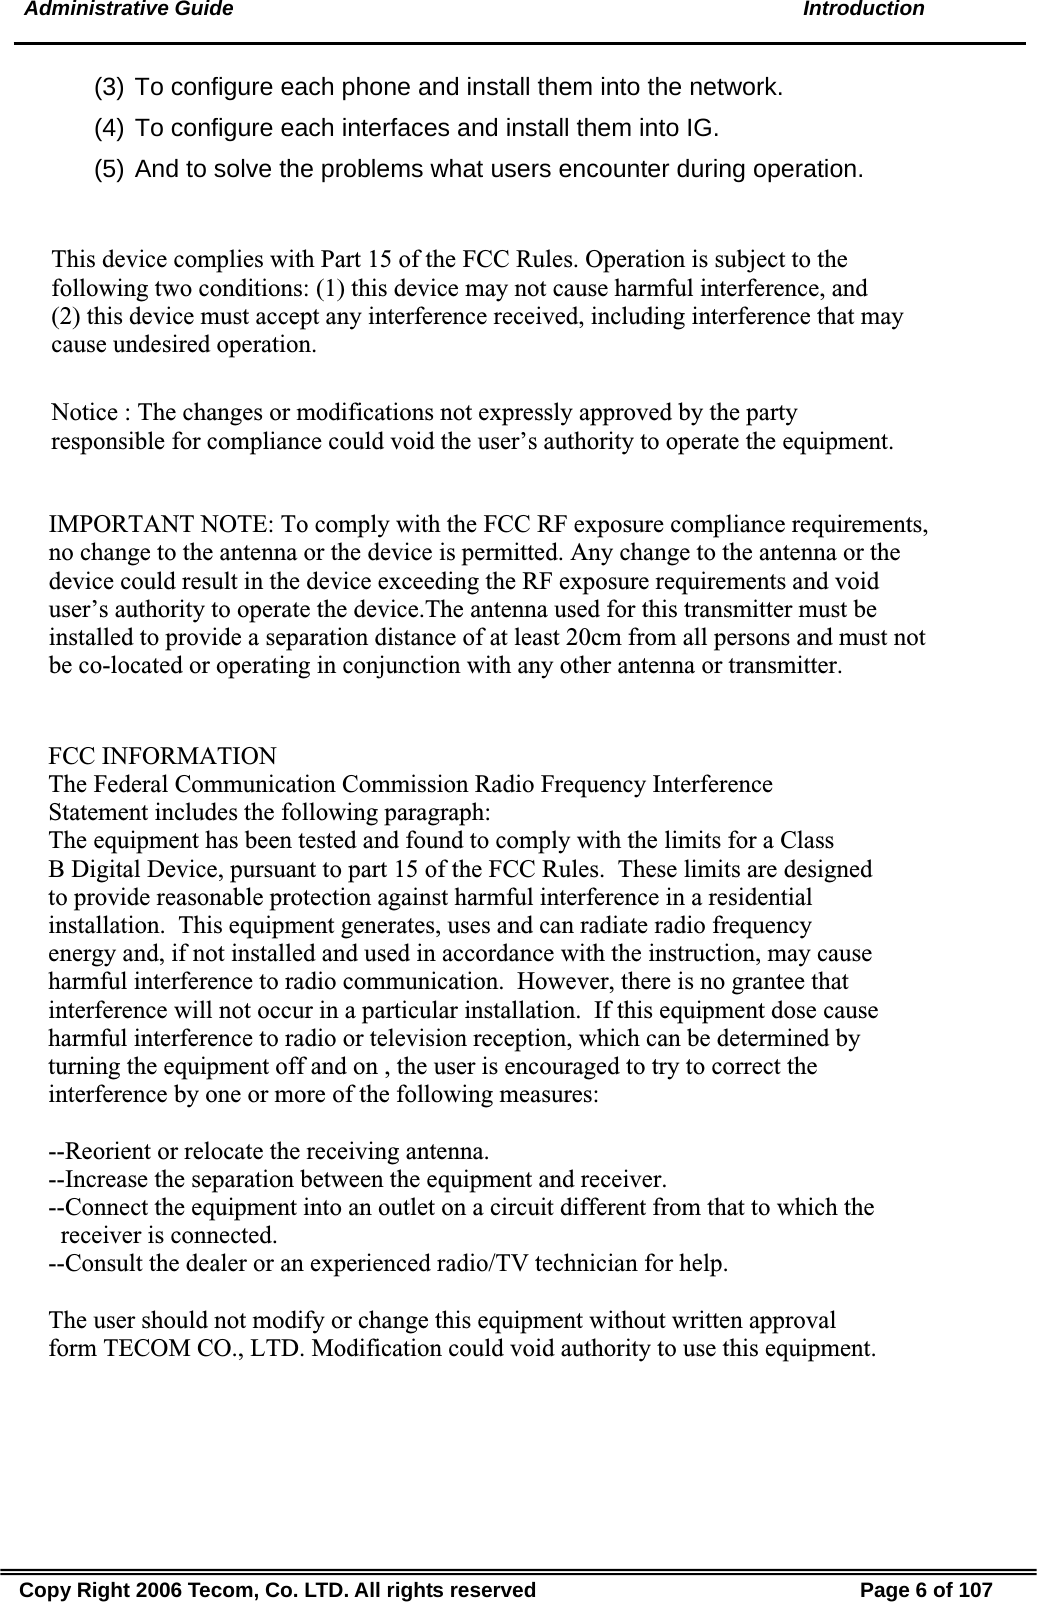  Administrative Guide  Introduction (3) To configure each phone and install them into the network. (4) To configure each interfaces and install them into IG. (5) And to solve the problems what users encounter during operation. Copy Right 2006 Tecom, Co. LTD. All rights reserved  Page 6 of 107 This device complies with Part 15 of the FCC Rules. Operation is subject to the following two conditions: (1) this device may not cause harmful interference, and (2) this device must accept any interference received, including interference that may cause undesired operation.Notice : The changes or modifications not expressly approved by the party responsible for compliance could void the user’s authority to operate the equipment.IMPORTANT NOTE: To comply with the FCC RF exposure compliance requirements, no change to the antenna or the device is permitted. Any change to the antenna or the device could result in the device exceeding the RF exposure requirements and void user’s authority to operate the device.The antenna used for this transmitter must be installed to provide a separation distance of at least 20cm from all persons and must not be co-located or operating in conjunction with any other antenna or transmitter.FCC INFORMATIONThe Federal Communication Commission Radio Frequency InterferenceStatement includes the following paragraph:The equipment has been tested and found to comply with the limits for a ClassB Digital Device, pursuant to part 15 of the FCC Rules.  These limits are designedto provide reasonable protection against harmful interference in a residentialinstallation.  This equipment generates, uses and can radiate radio frequencyenergy and, if not installed and used in accordance with the instruction, may causeharmful interference to radio communication.  However, there is no grantee thatinterference will not occur in a particular installation.  If this equipment dose causeharmful interference to radio or television reception, which can be determined by turning the equipment off and on , the user is encouraged to try to correct the interference by one or more of the following measures:--Reorient or relocate the receiving antenna.--Increase the separation between the equipment and receiver.--Connect the equipment into an outlet on a circuit different from that to which the   receiver is connected.--Consult the dealer or an experienced radio/TV technician for help.The user should not modify or change this equipment without written approvalform TECOM CO., LTD. Modification could void authority to use this equipment.